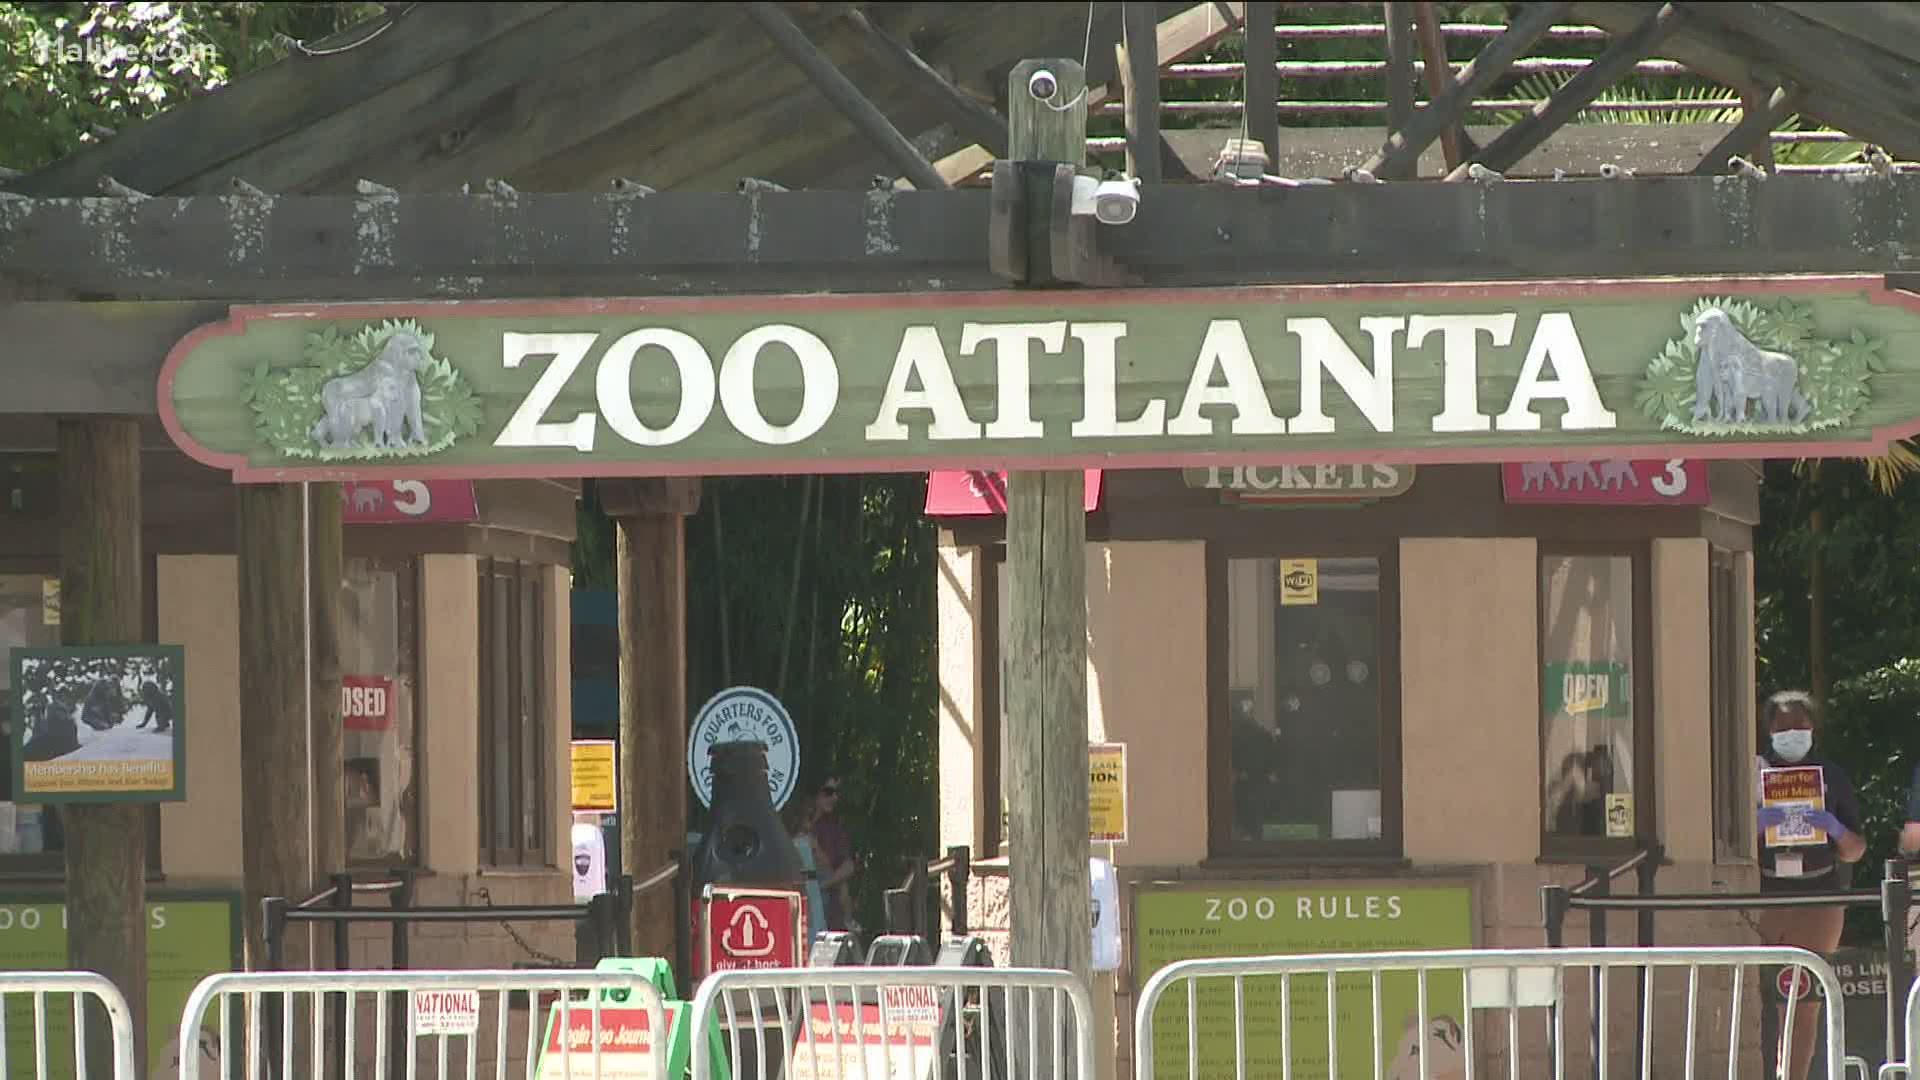 After being closed for months, the zoo reopened to the public amid the coronavirus pandemic.